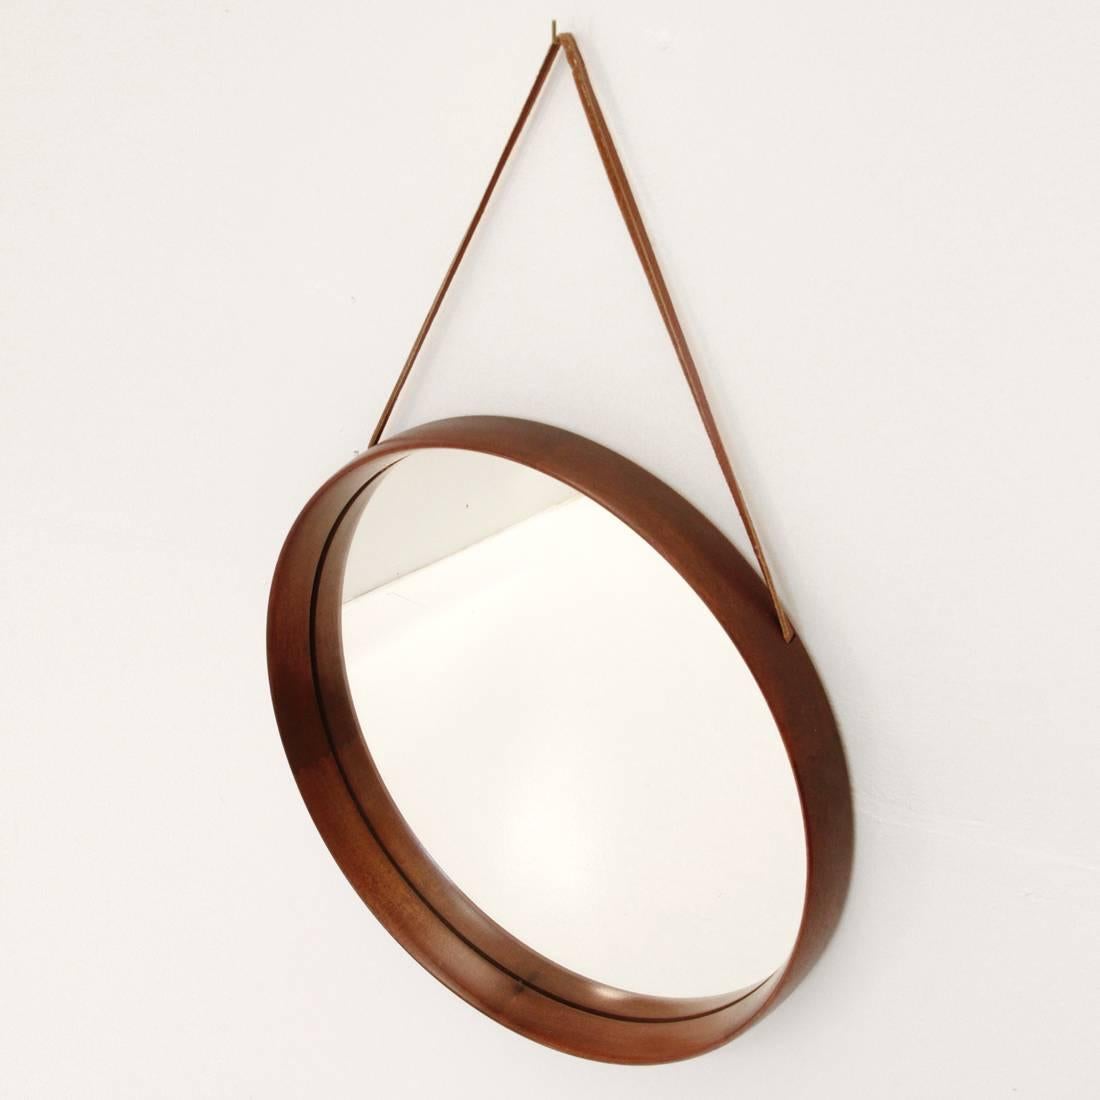 Round mirror designed by Uno & Östen Kristiansson and produced by the Swedish company Luxus during the 1950s. The piece features a solid oak frame with finger joint connections between the different shade parts and a new leather strap.